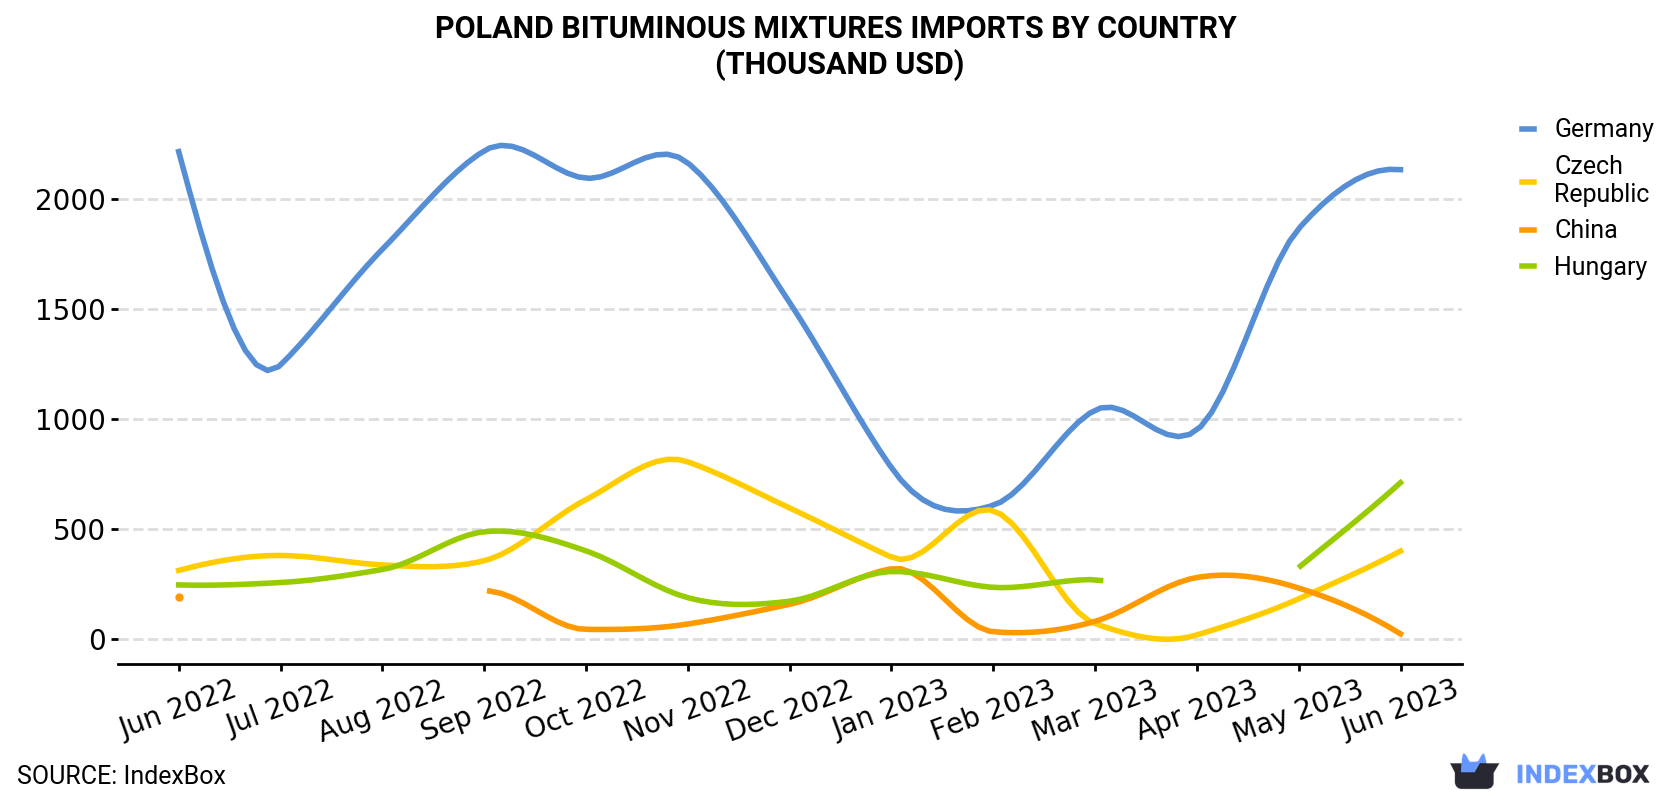 Poland Bituminous Mixtures Imports By Country (Thousand USD)